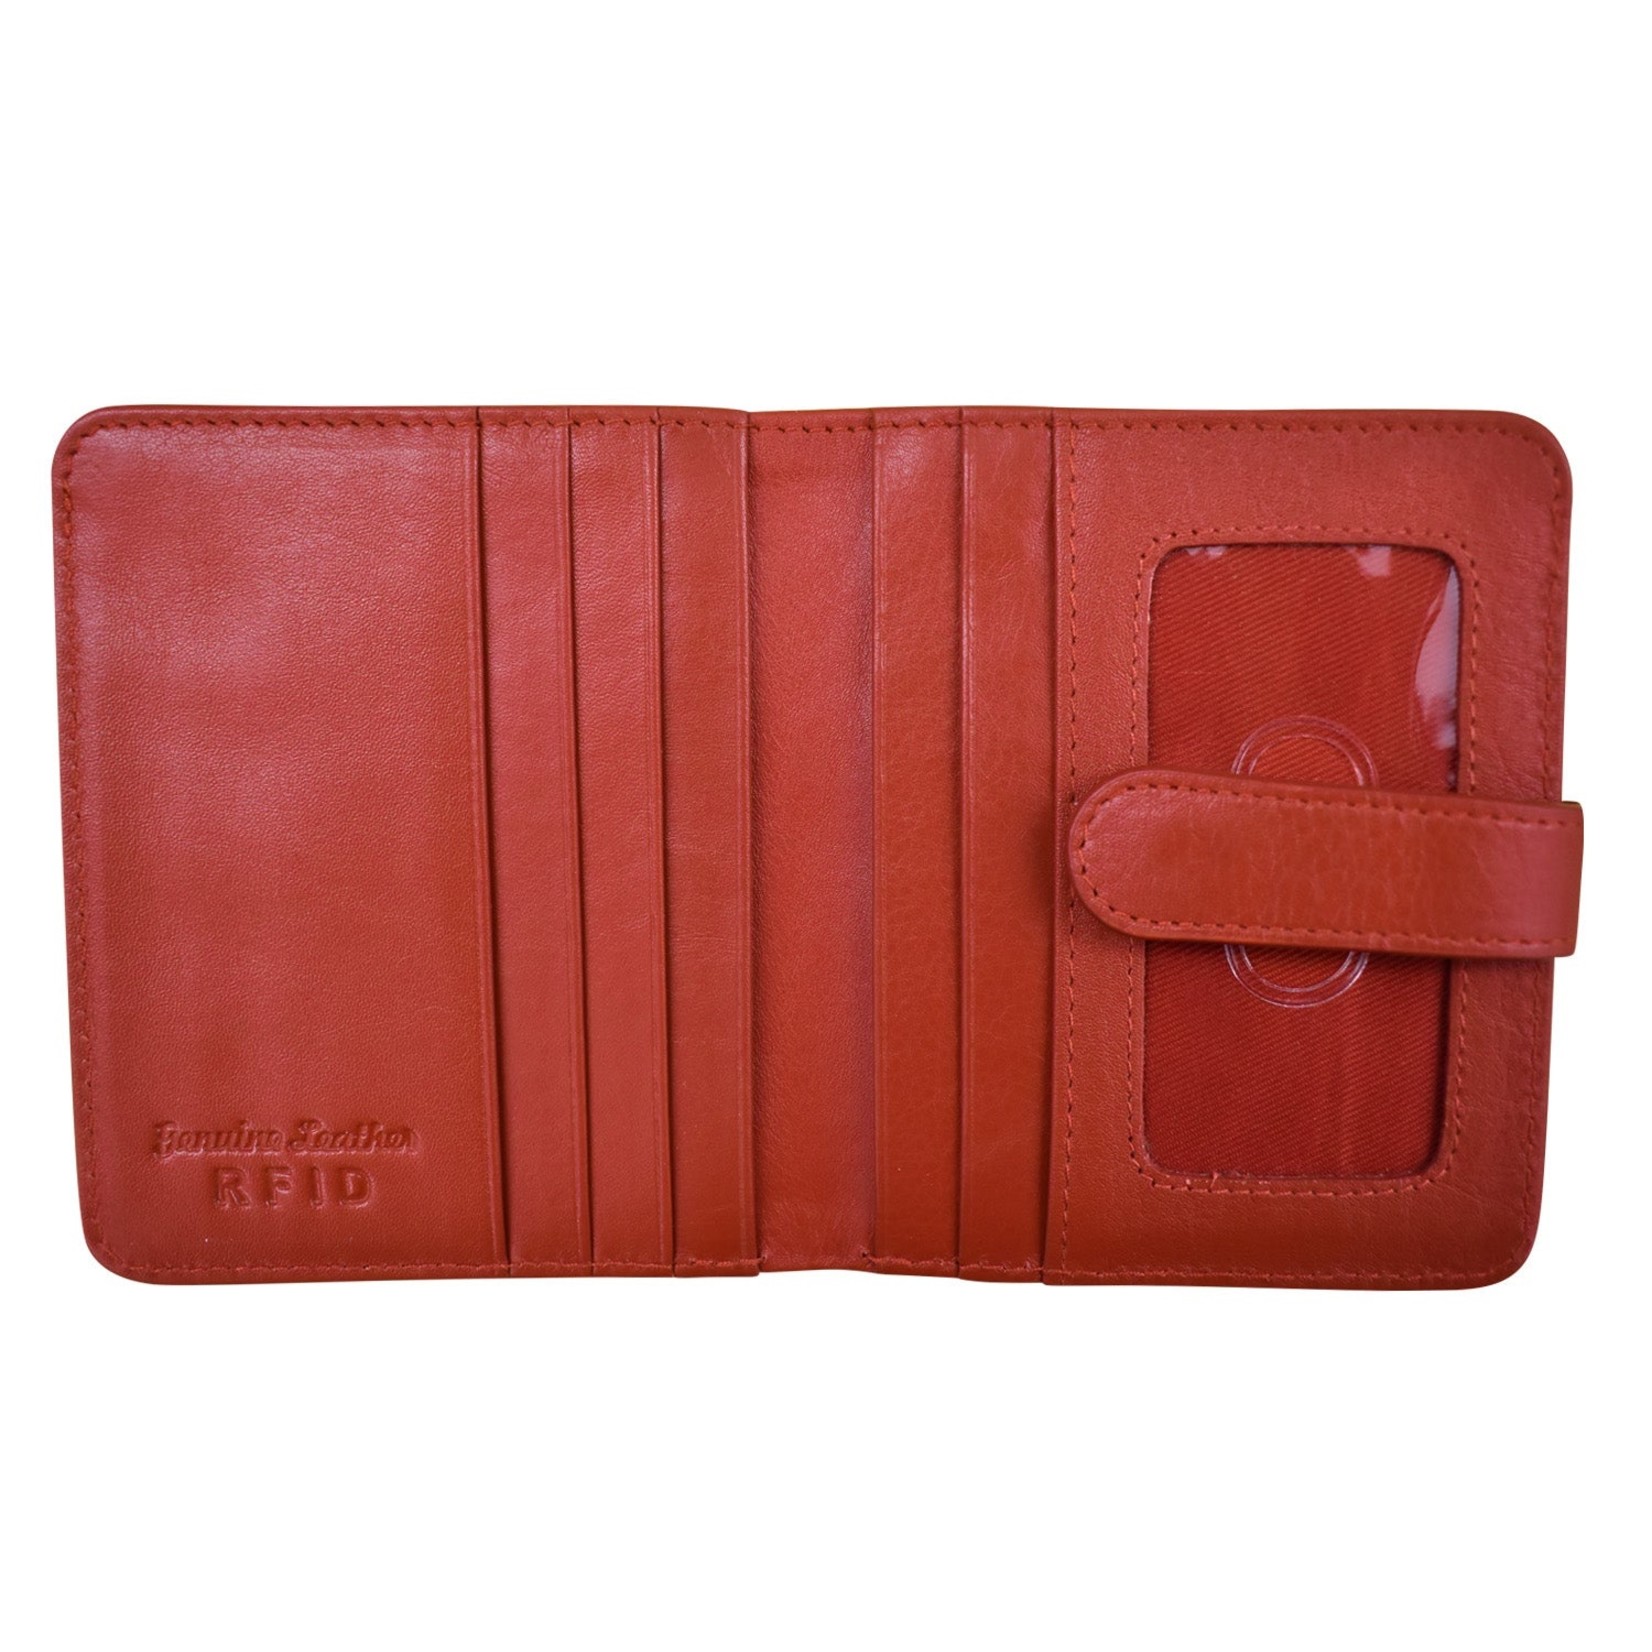 Leather Handbags and Accessories 7301 Red - RFID Small Wallet